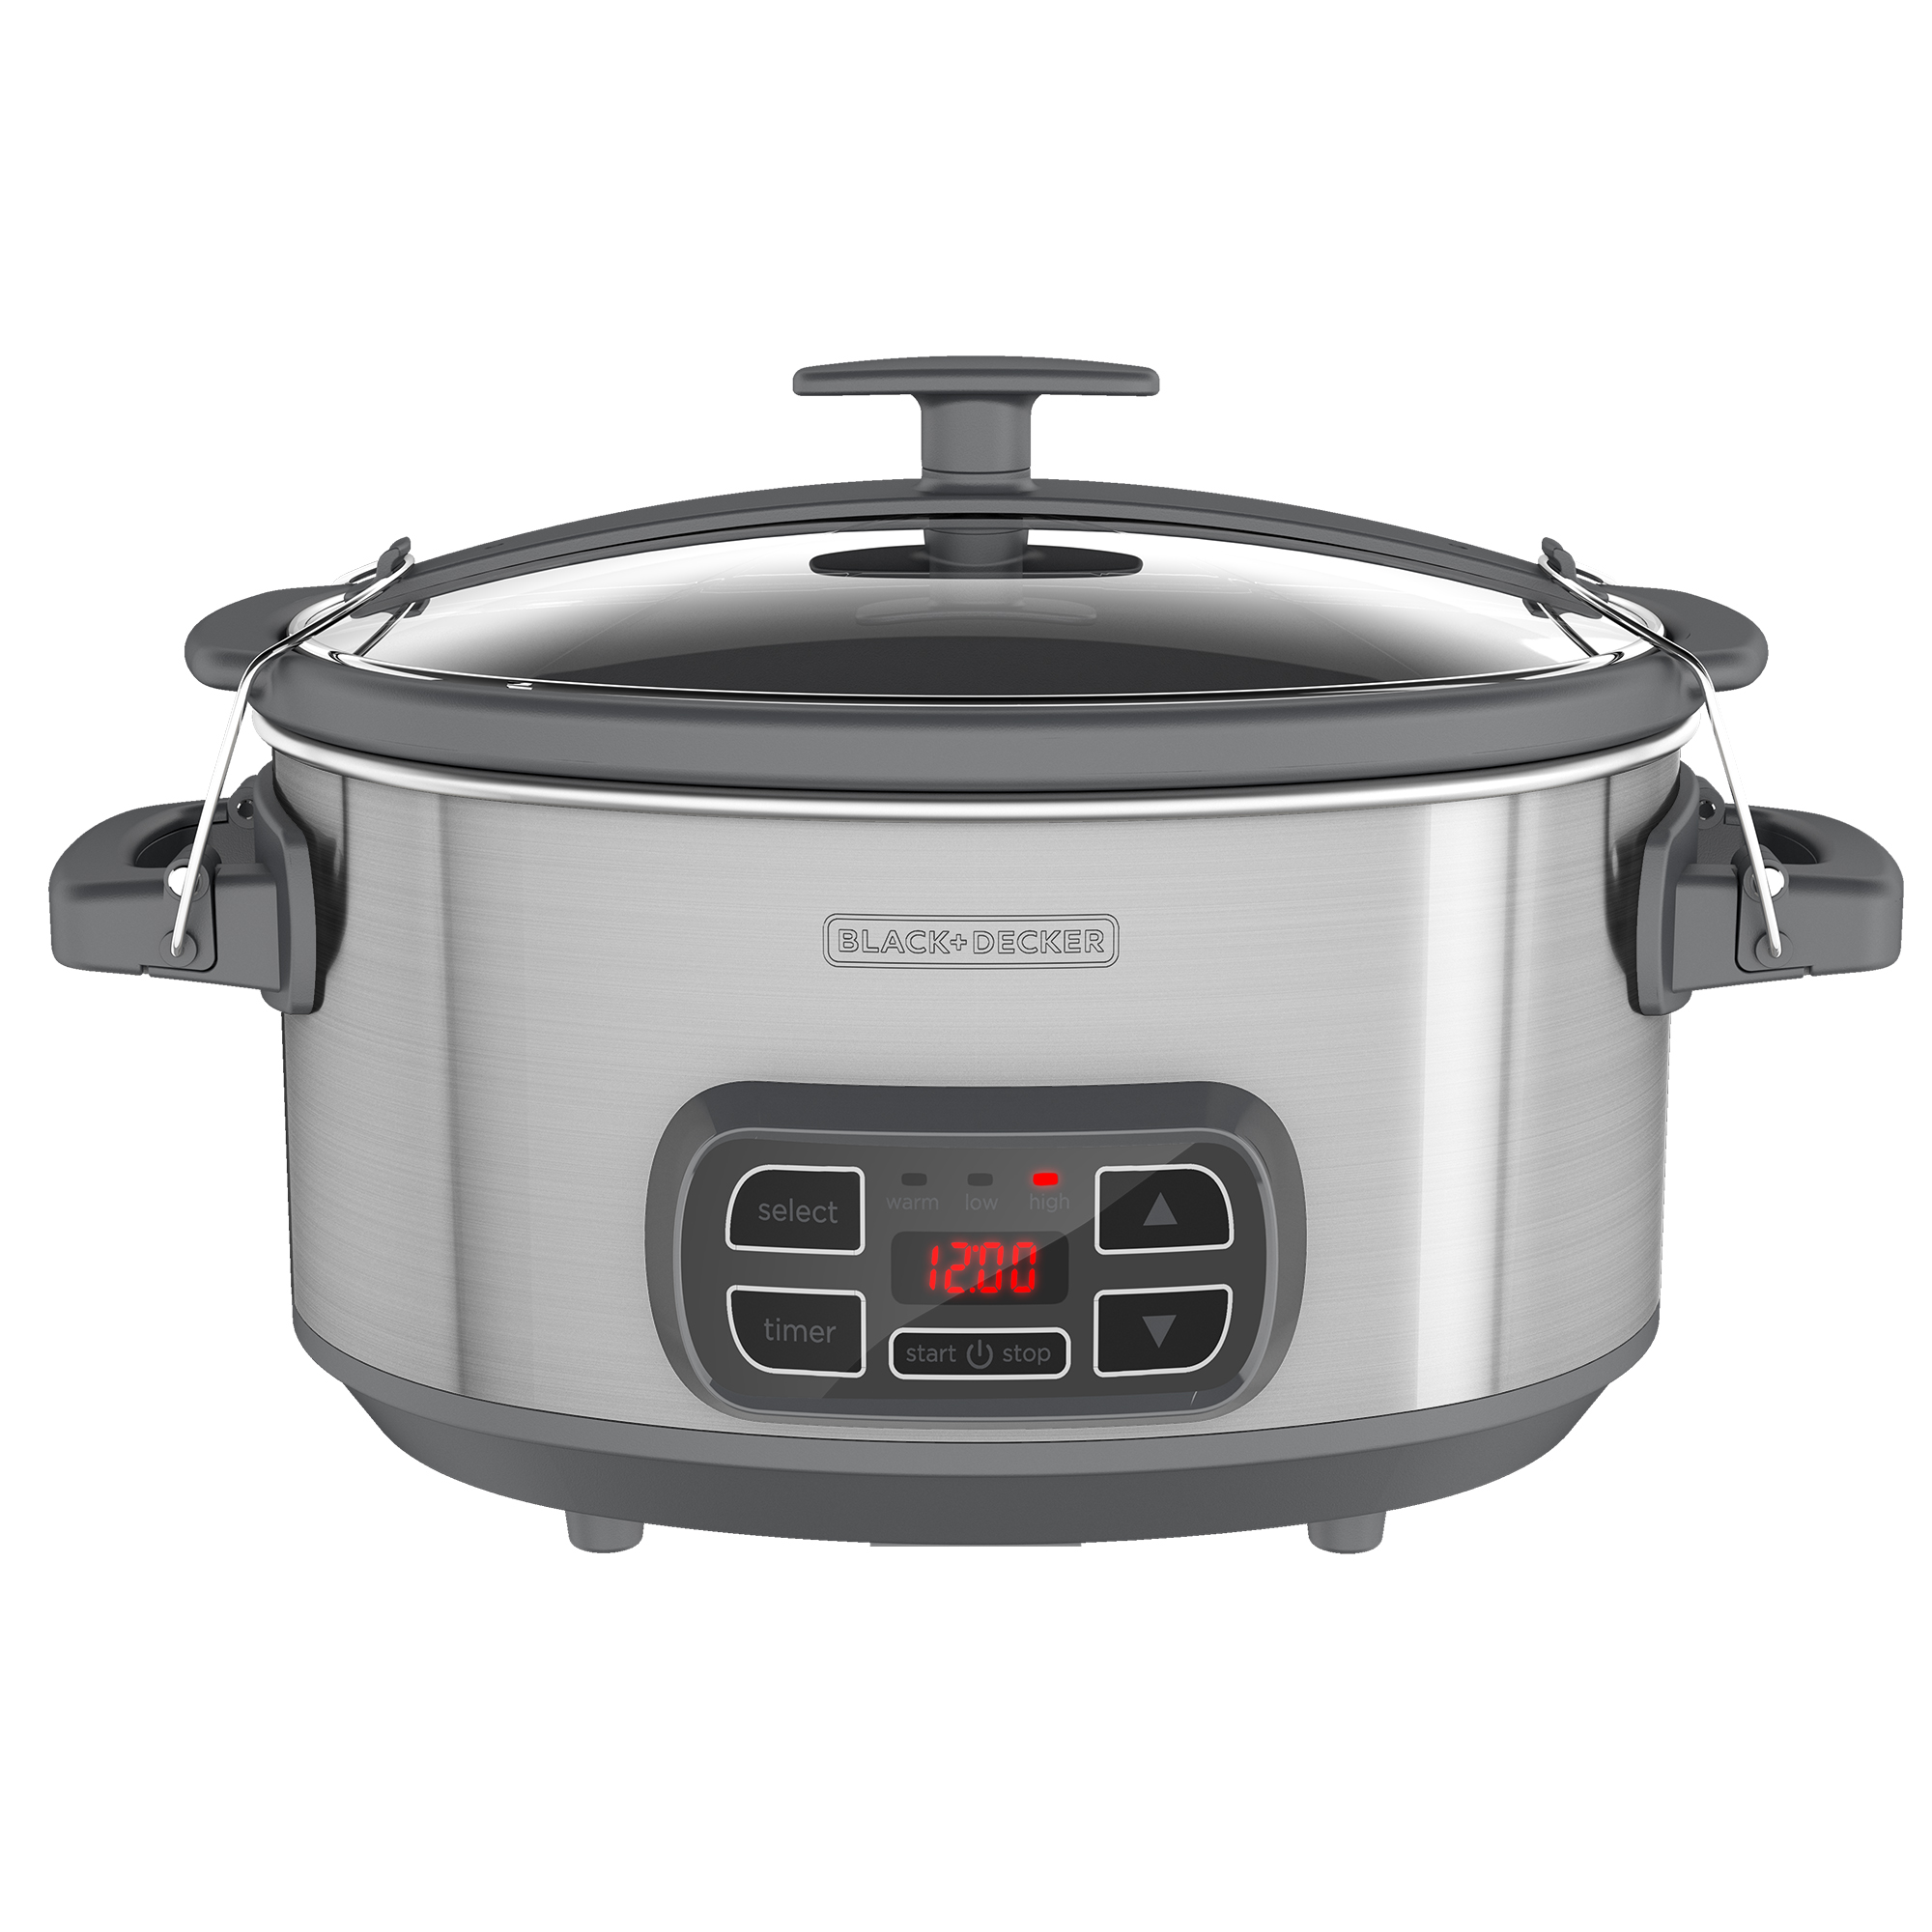 https://s7cdn.spectrumbrands.com/~/media/SmallAppliancesUS/Black%20and%20Decker/Product%20Page/cooking%20appliances/slow%20cookers%20and%20multicookers/SCD1007/scd1007_prd1_HR.jpg?h=2000&la=en&w=2000